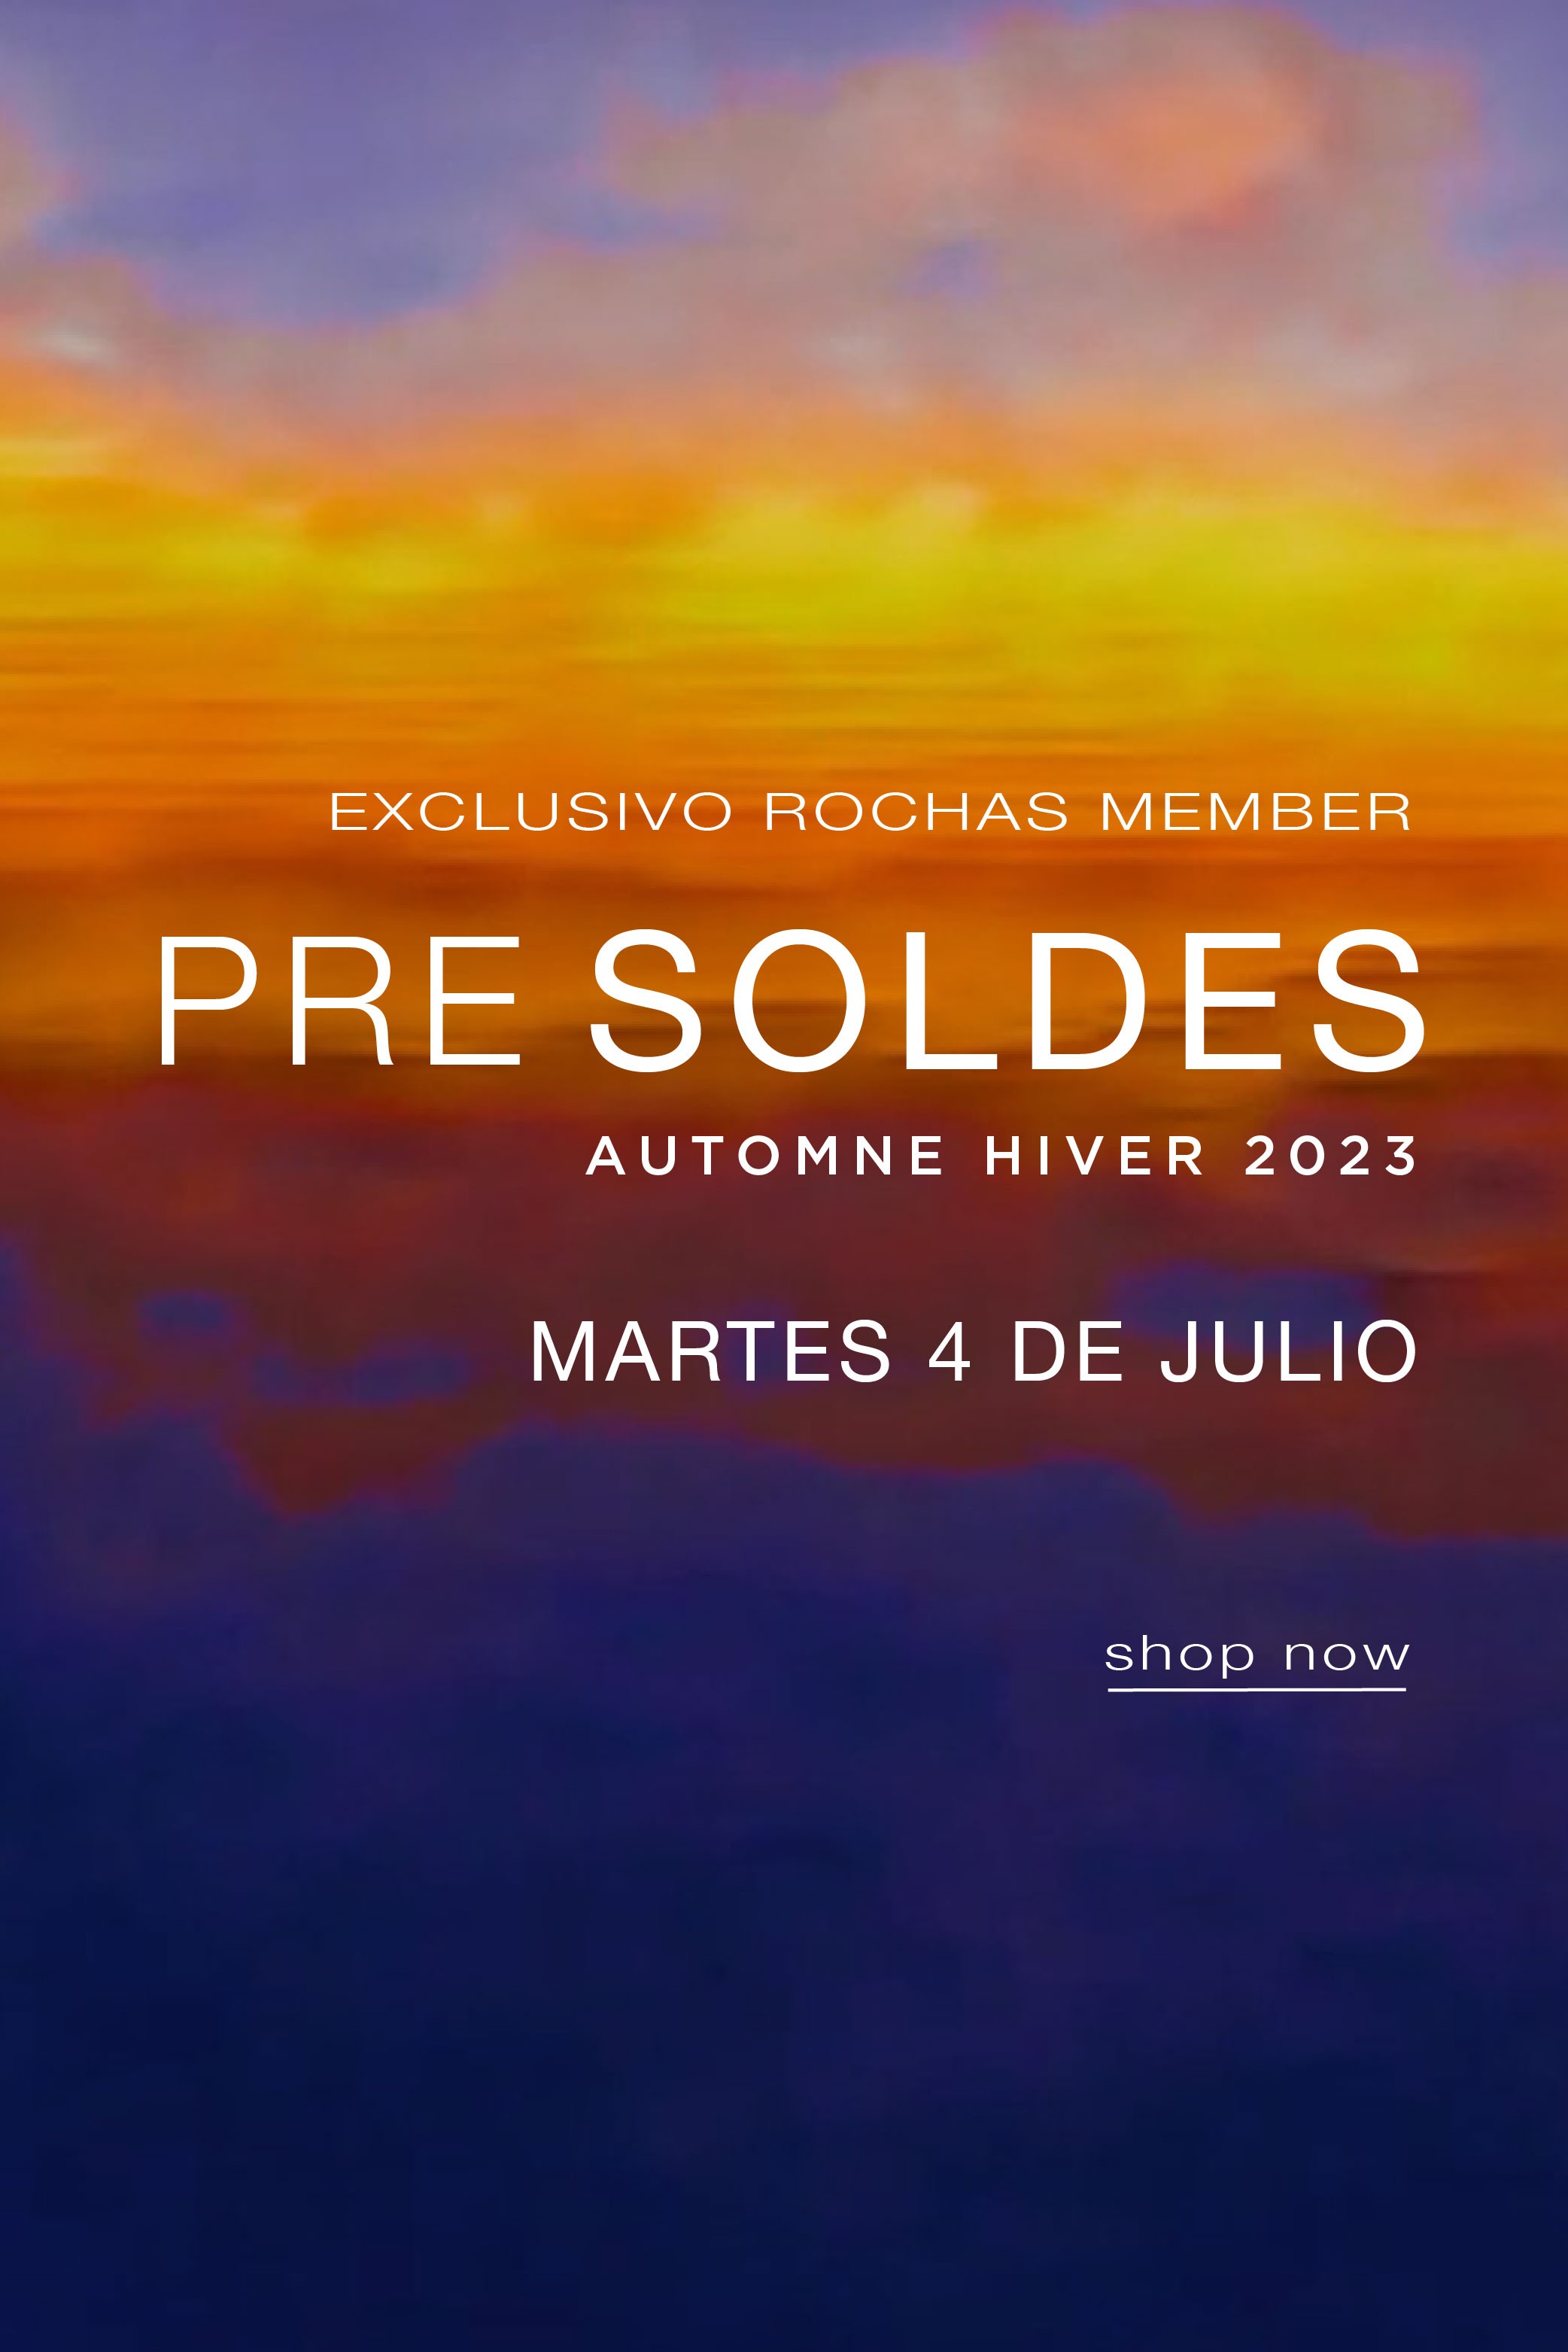 Pre soldes1000x150px banner Mobile-04